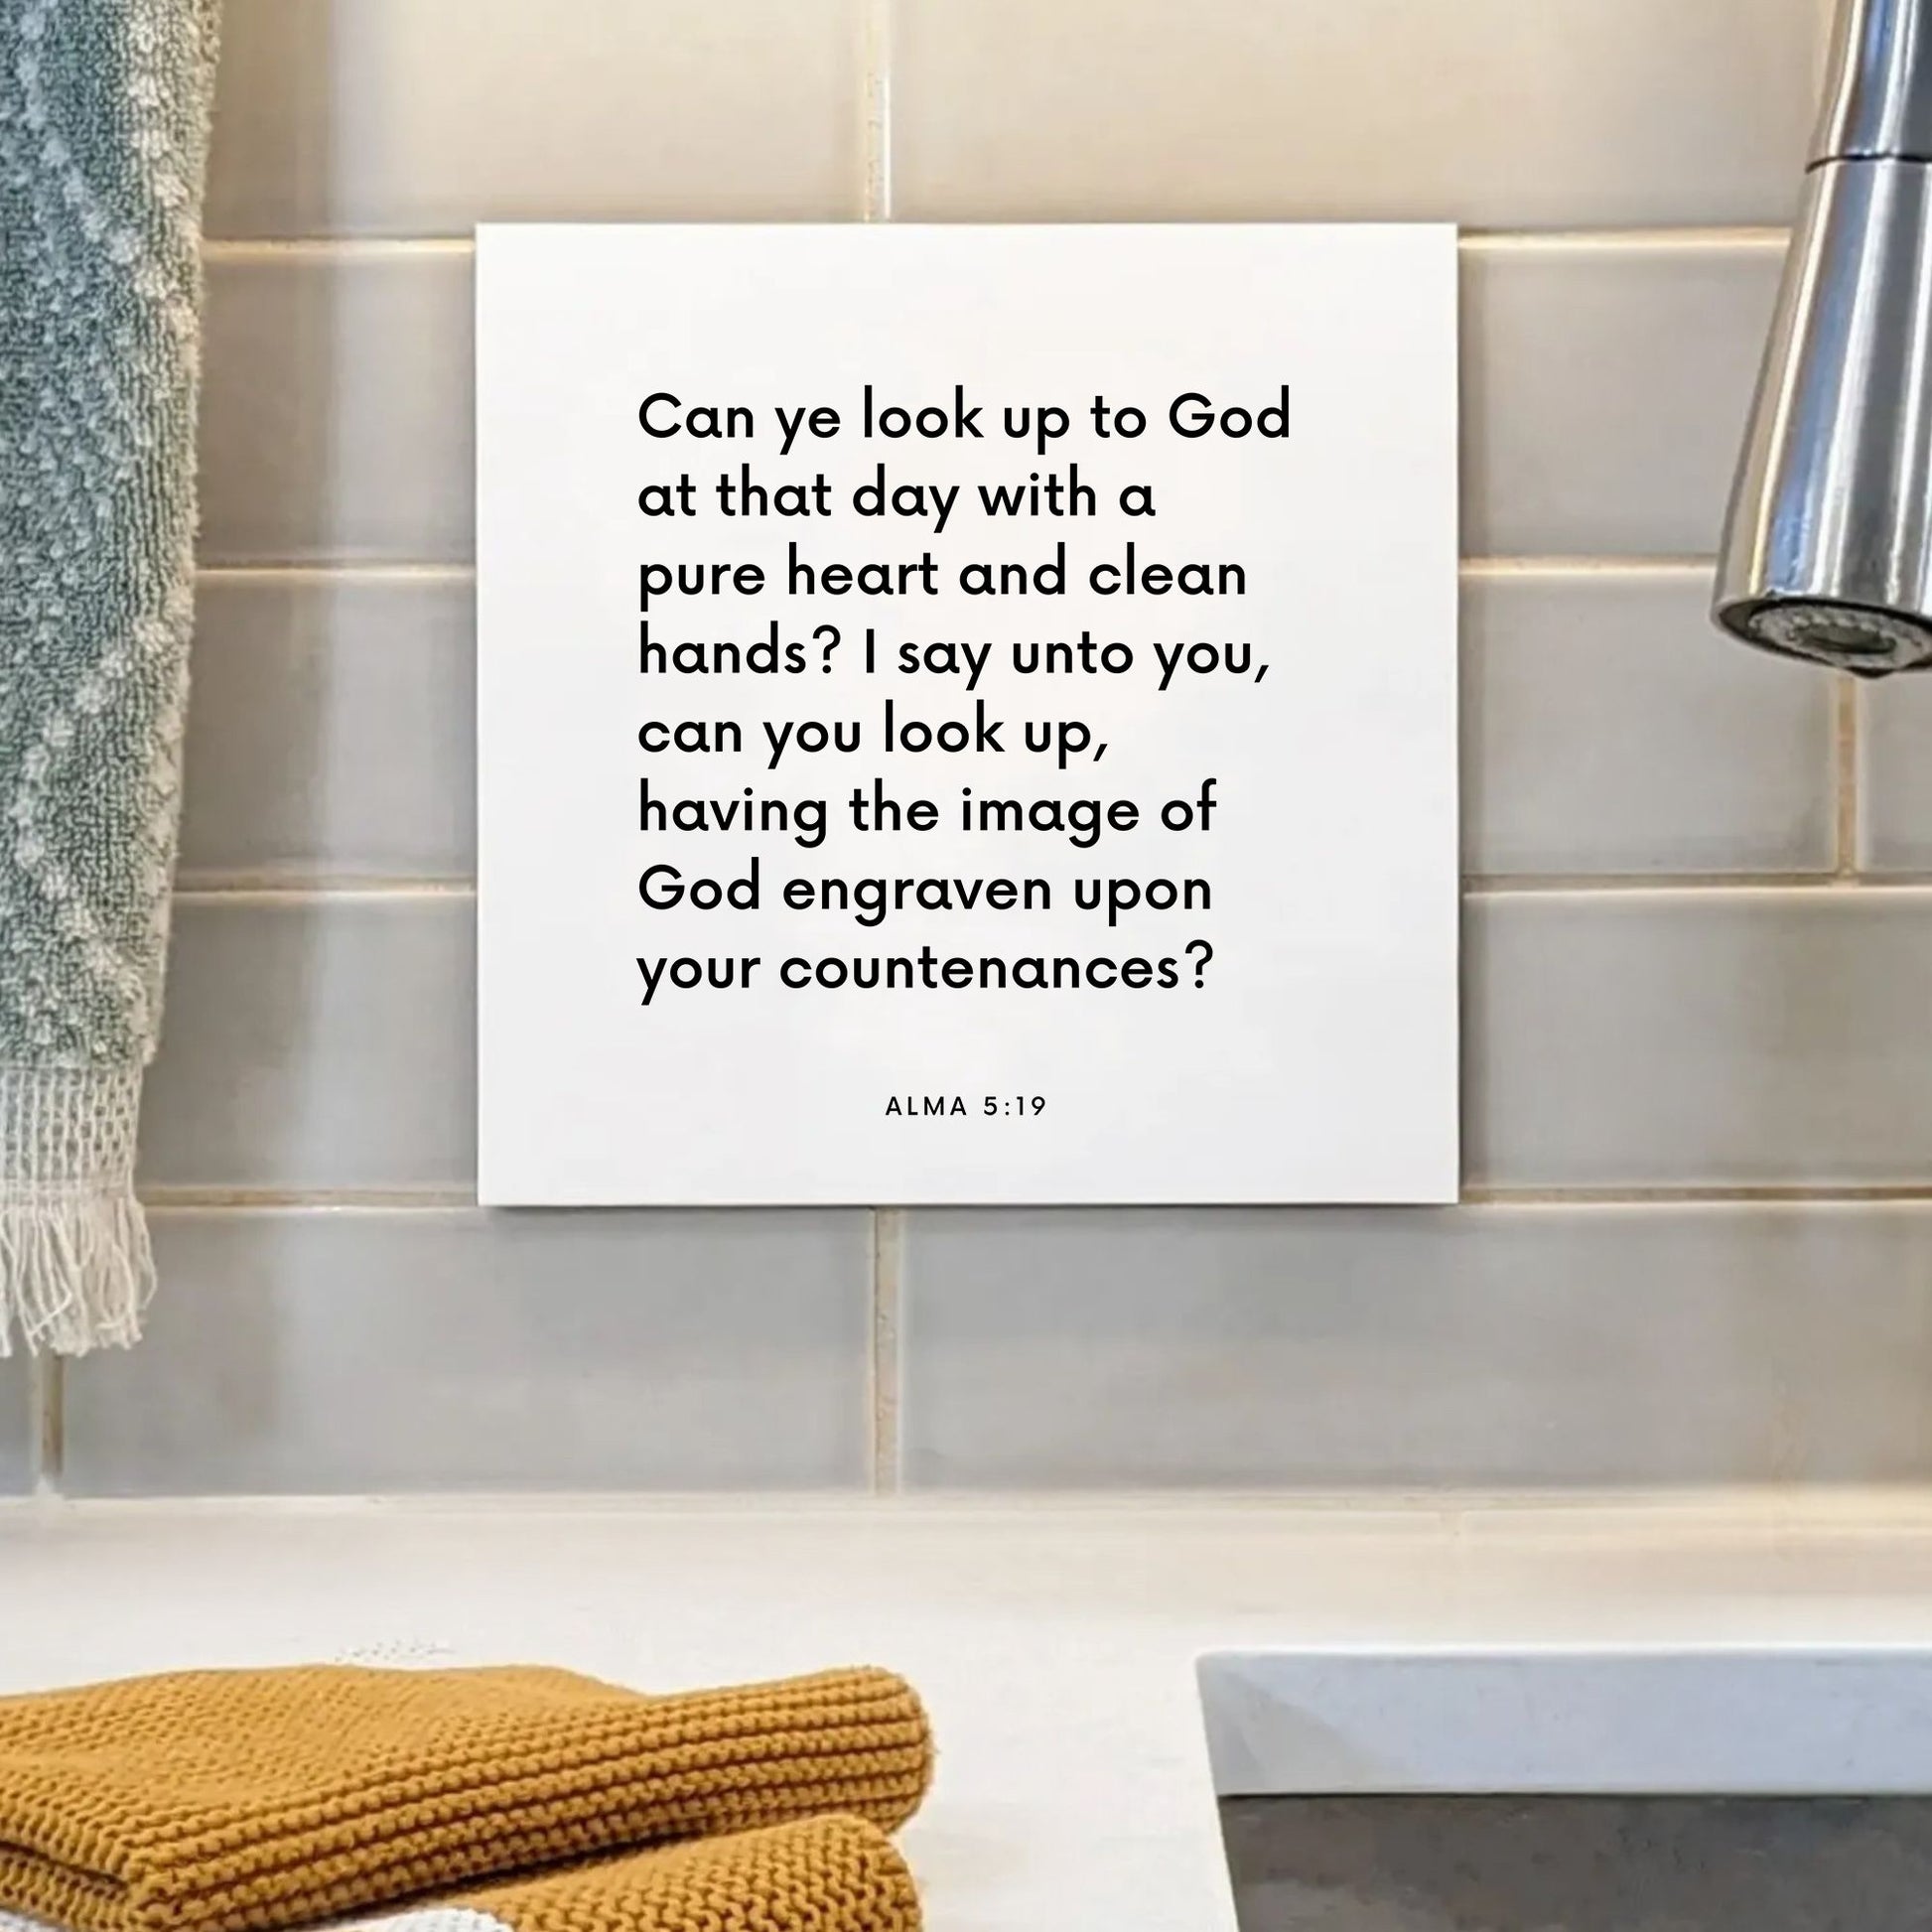 Sink mouting of the scripture tile for Alma 5:19 - "The image of God engraven upon your countenances"